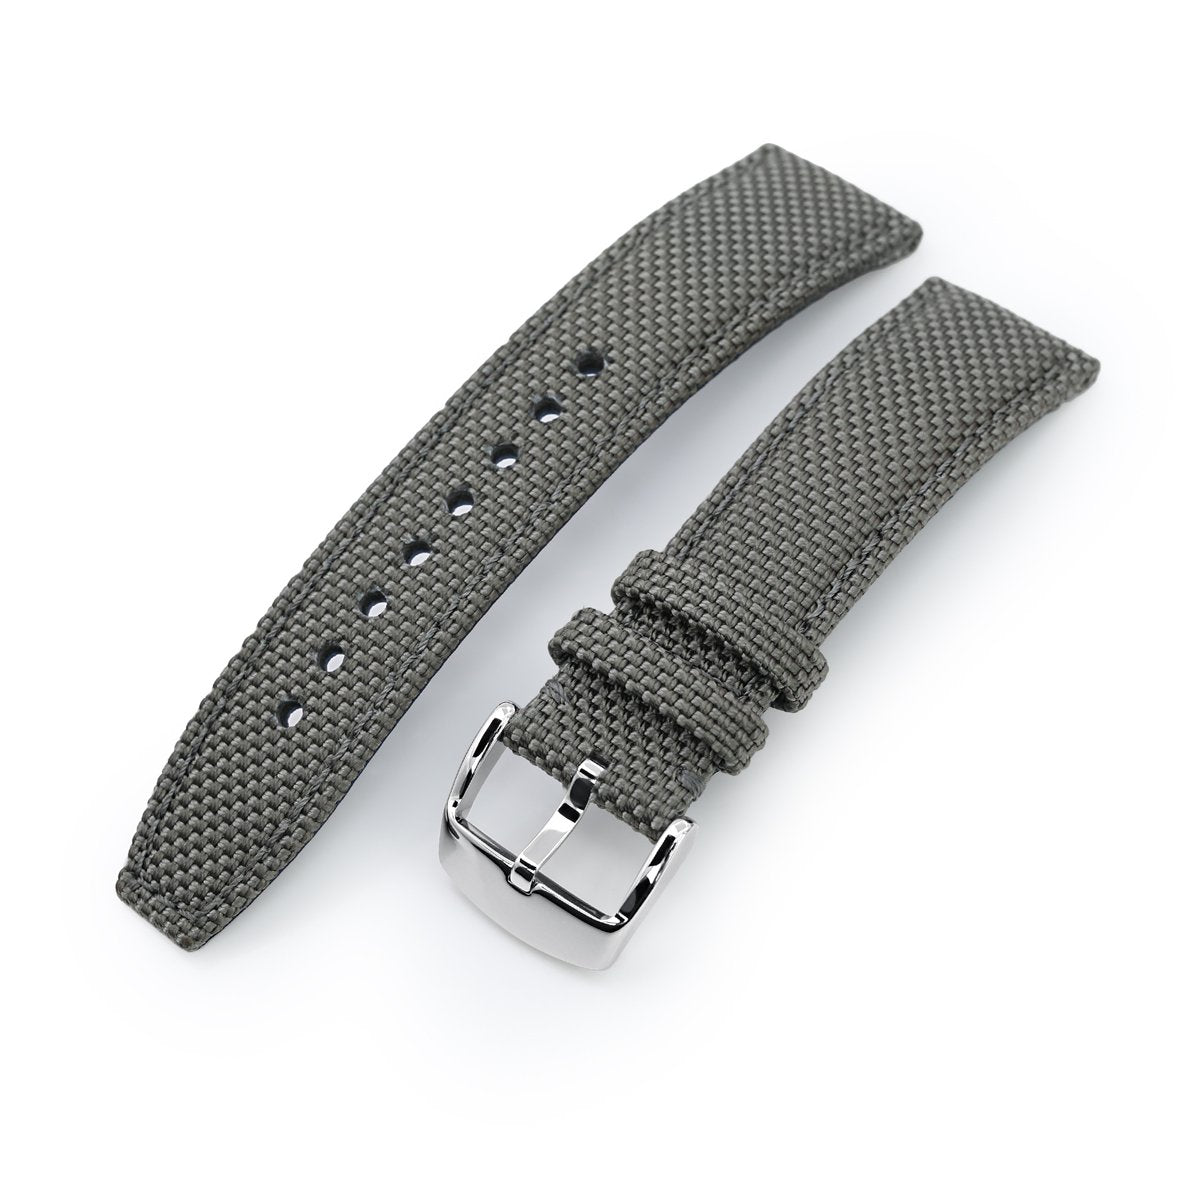 20mm 21mm or 22mm Strong Texture Woven Nylon Military Grey Watch Strap Polished Strapcode Watch Bands